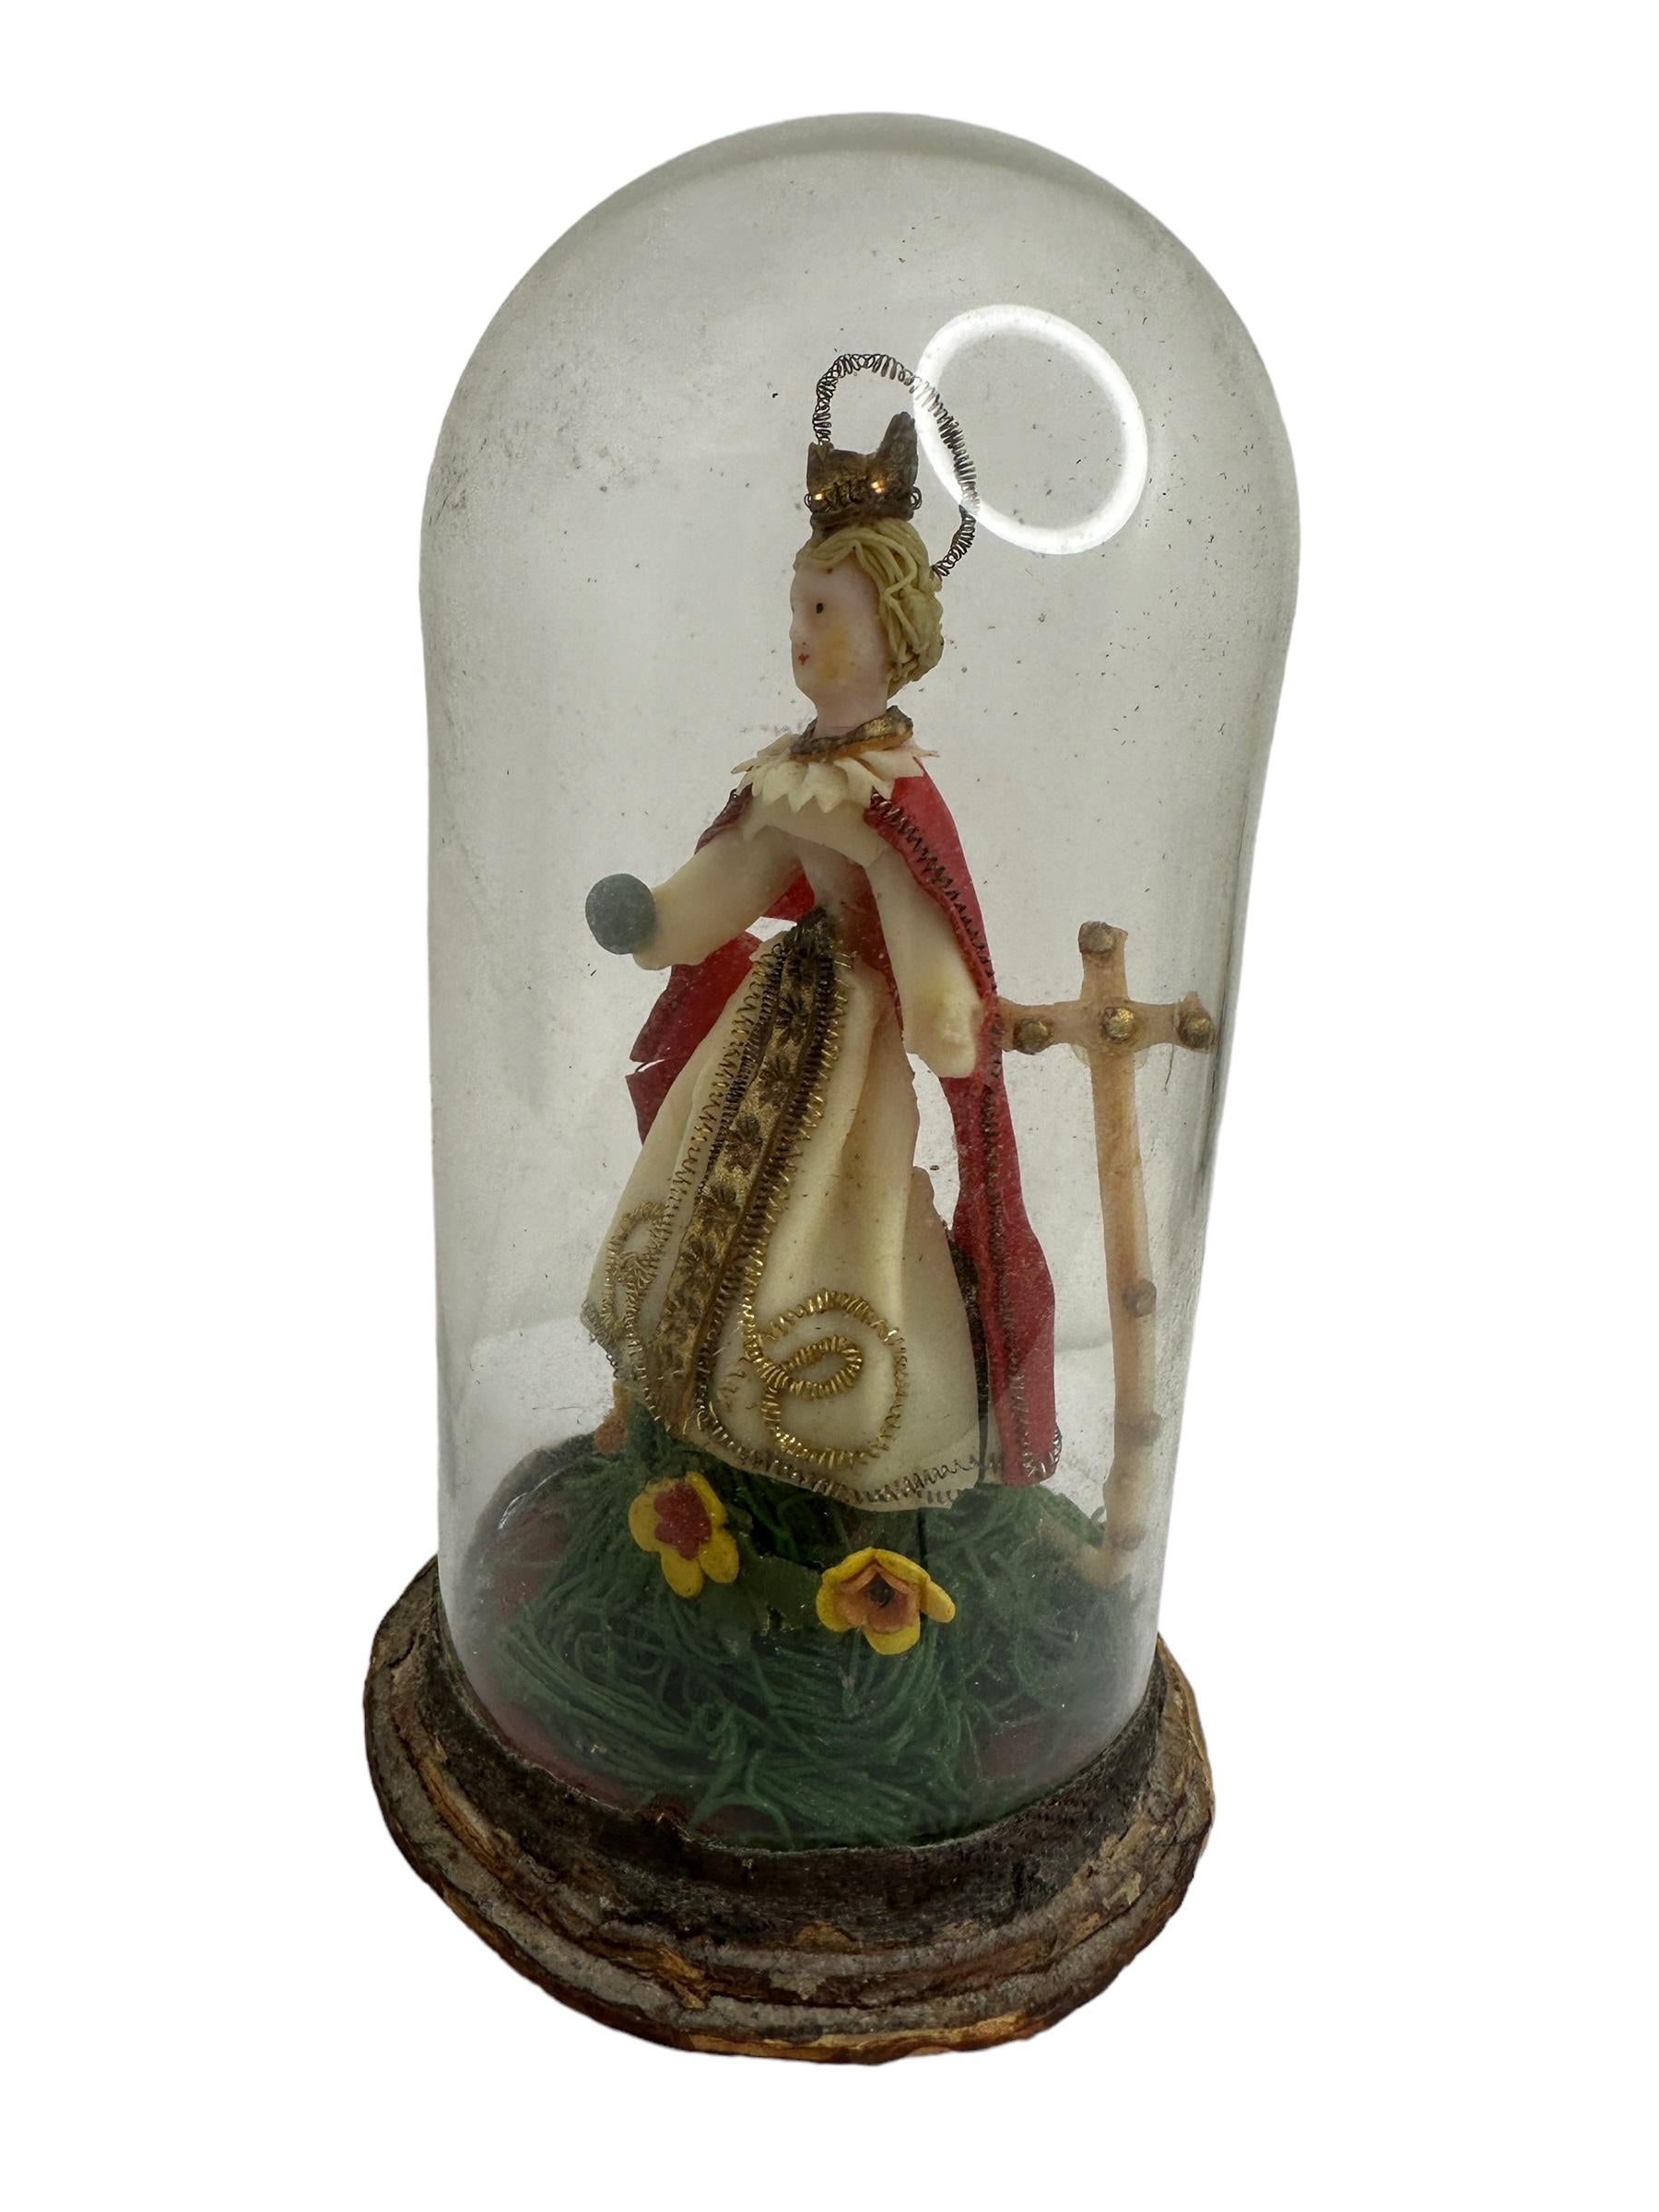 Here I have to offer a fine antique classic early 20th century Glass Display Case with a beautiful Monastery Work inside. A wonderful decorative item, in very nice as is condition.
This is a truly fine antique old piece. Great Item in your home. As